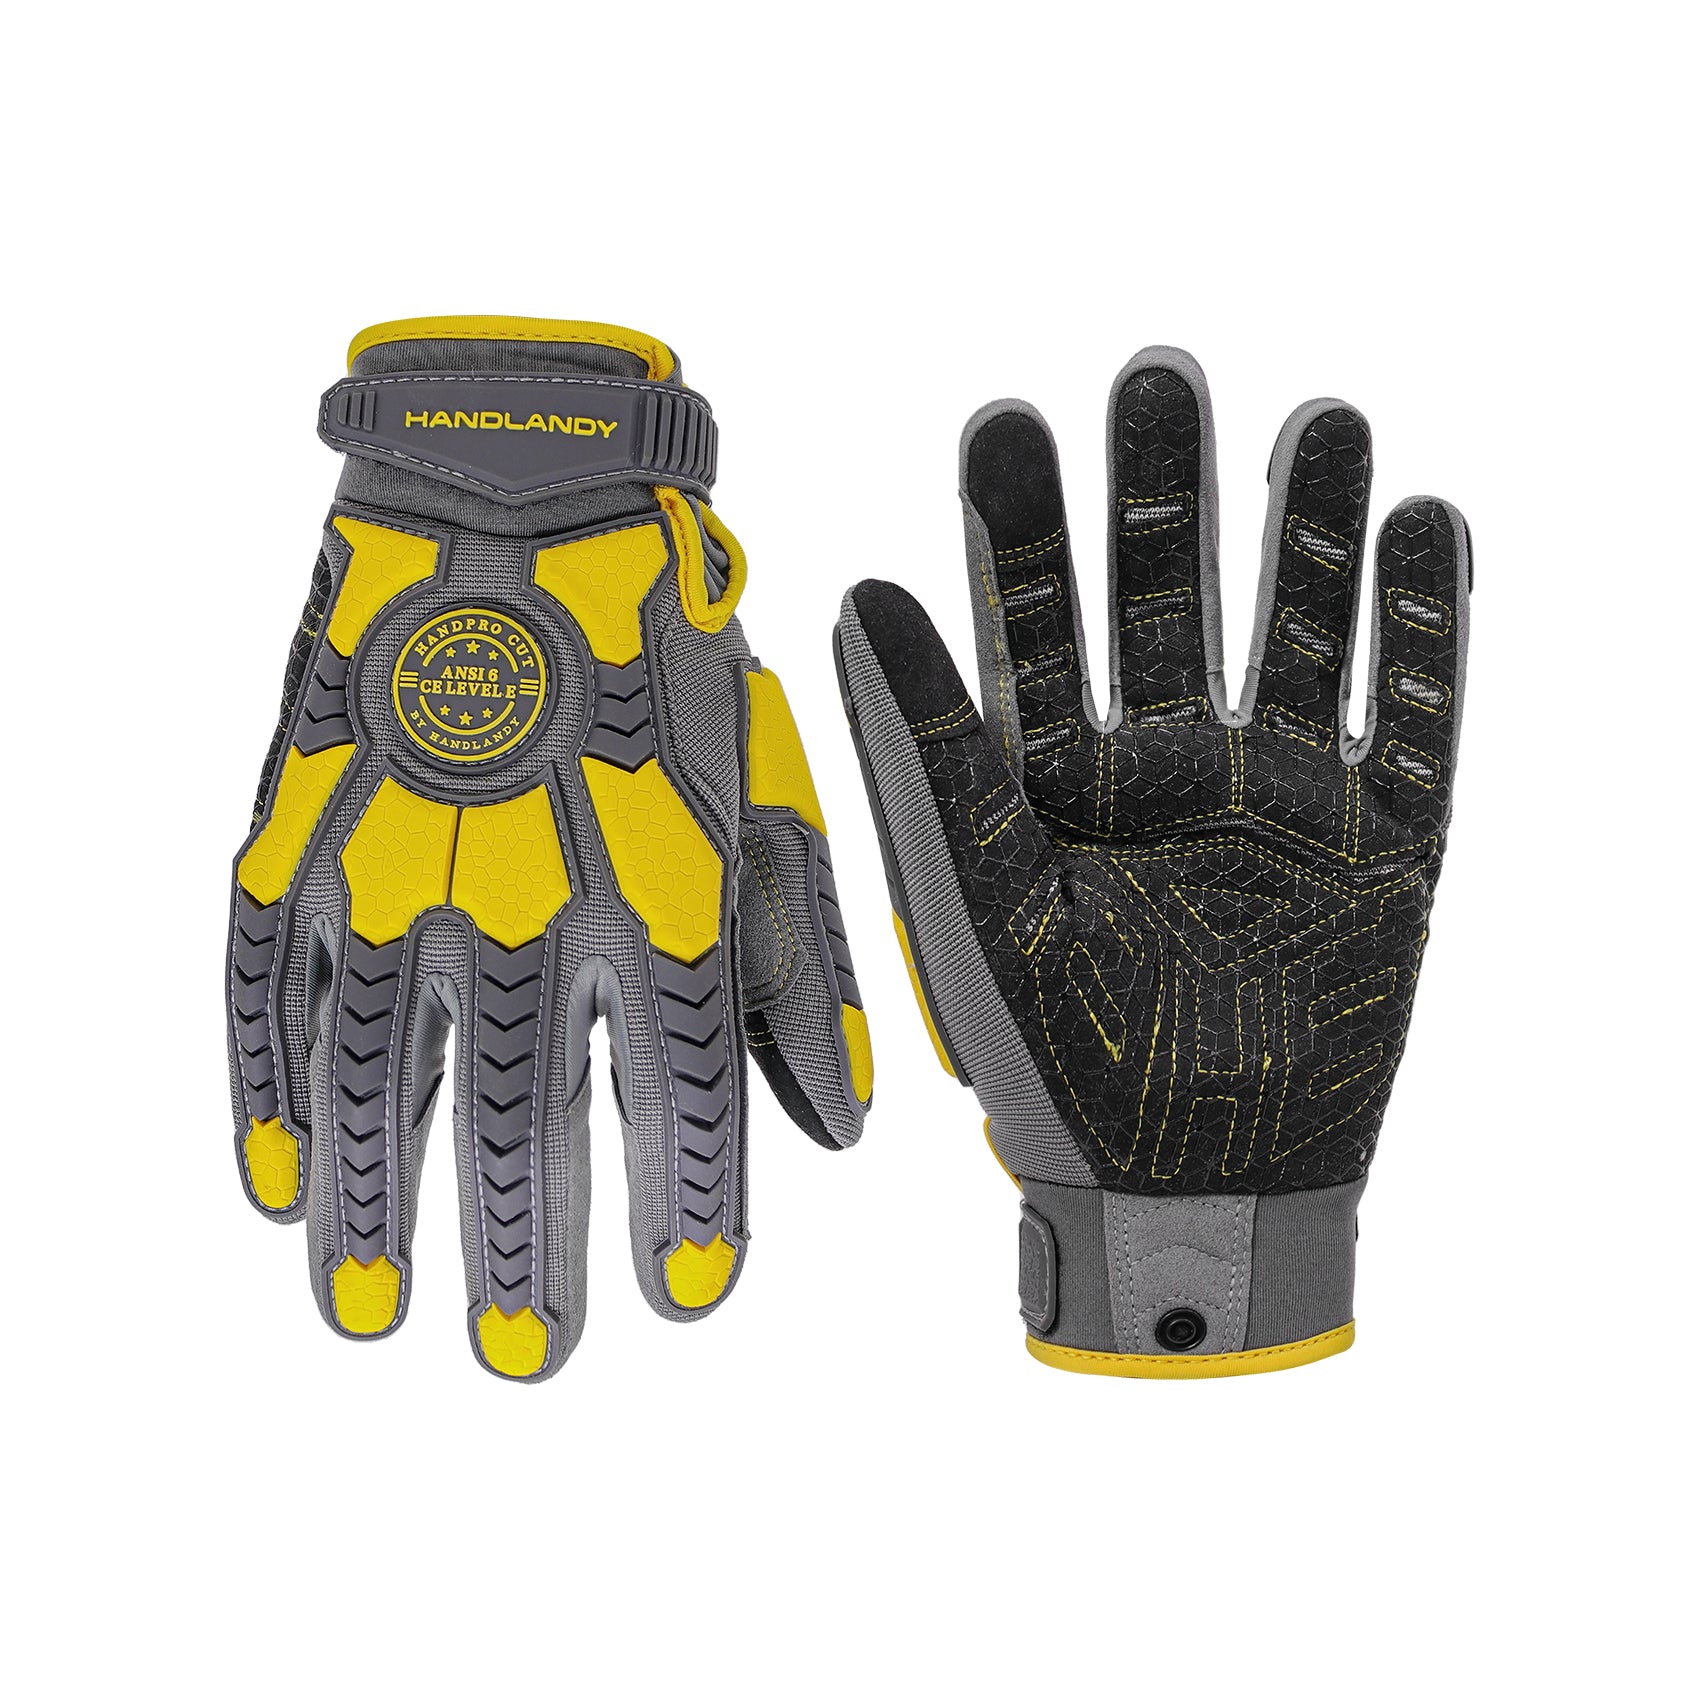 DEXGUARD™ A6 Cut Gloves, Back of the Hand Impact Resistant, Level 4  Abrasion Resistant, Textured Nitrile Coating.